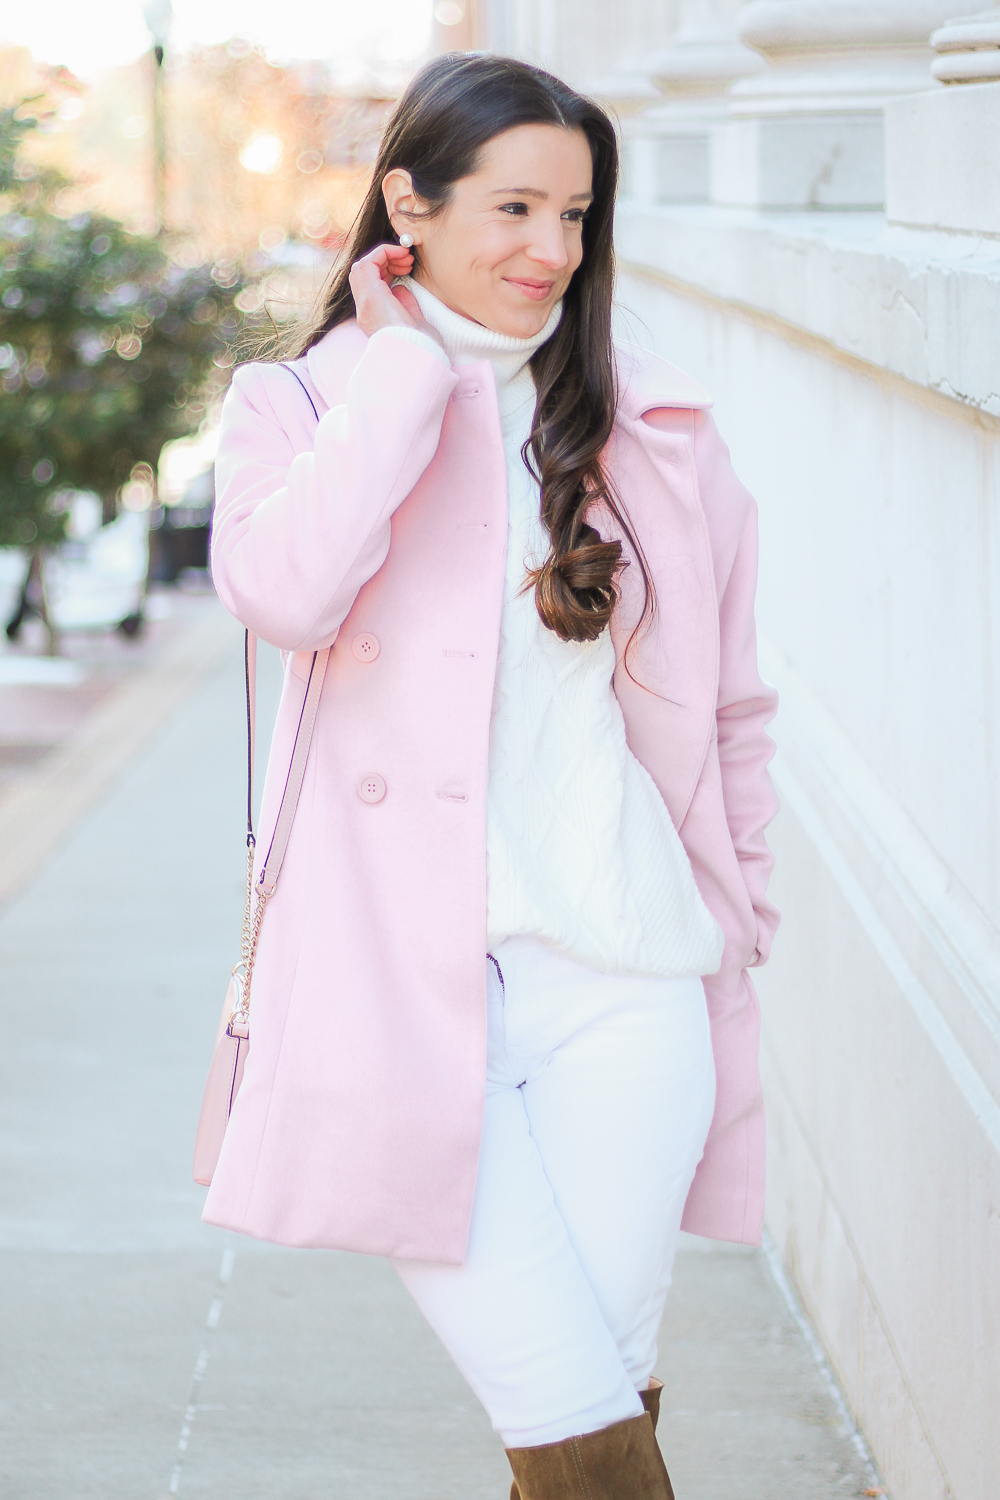 How to Wear a Light Pink Winter Coat by affordable fashion blogger Stephanie Ziajka from Diary of a Debutante, Allegra K Women's Peter Pan Collar Double Breasted Winter Coat, cute winter coats under 100, cute winter coats on amazon, winter whites with pops of pink